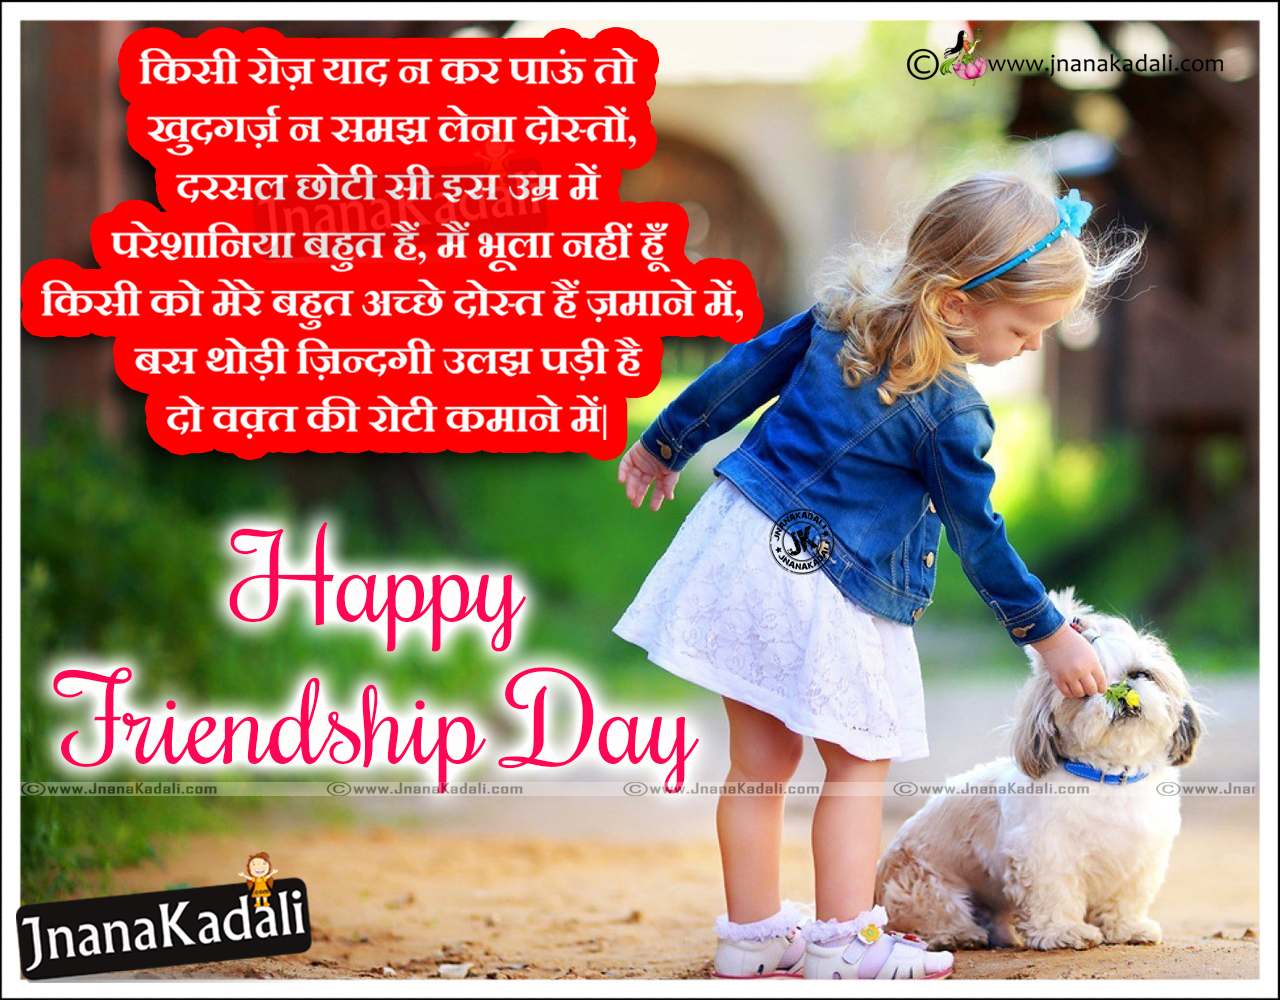 Cute Friendship Day wishes quotes with hd wallpapers 2016 international